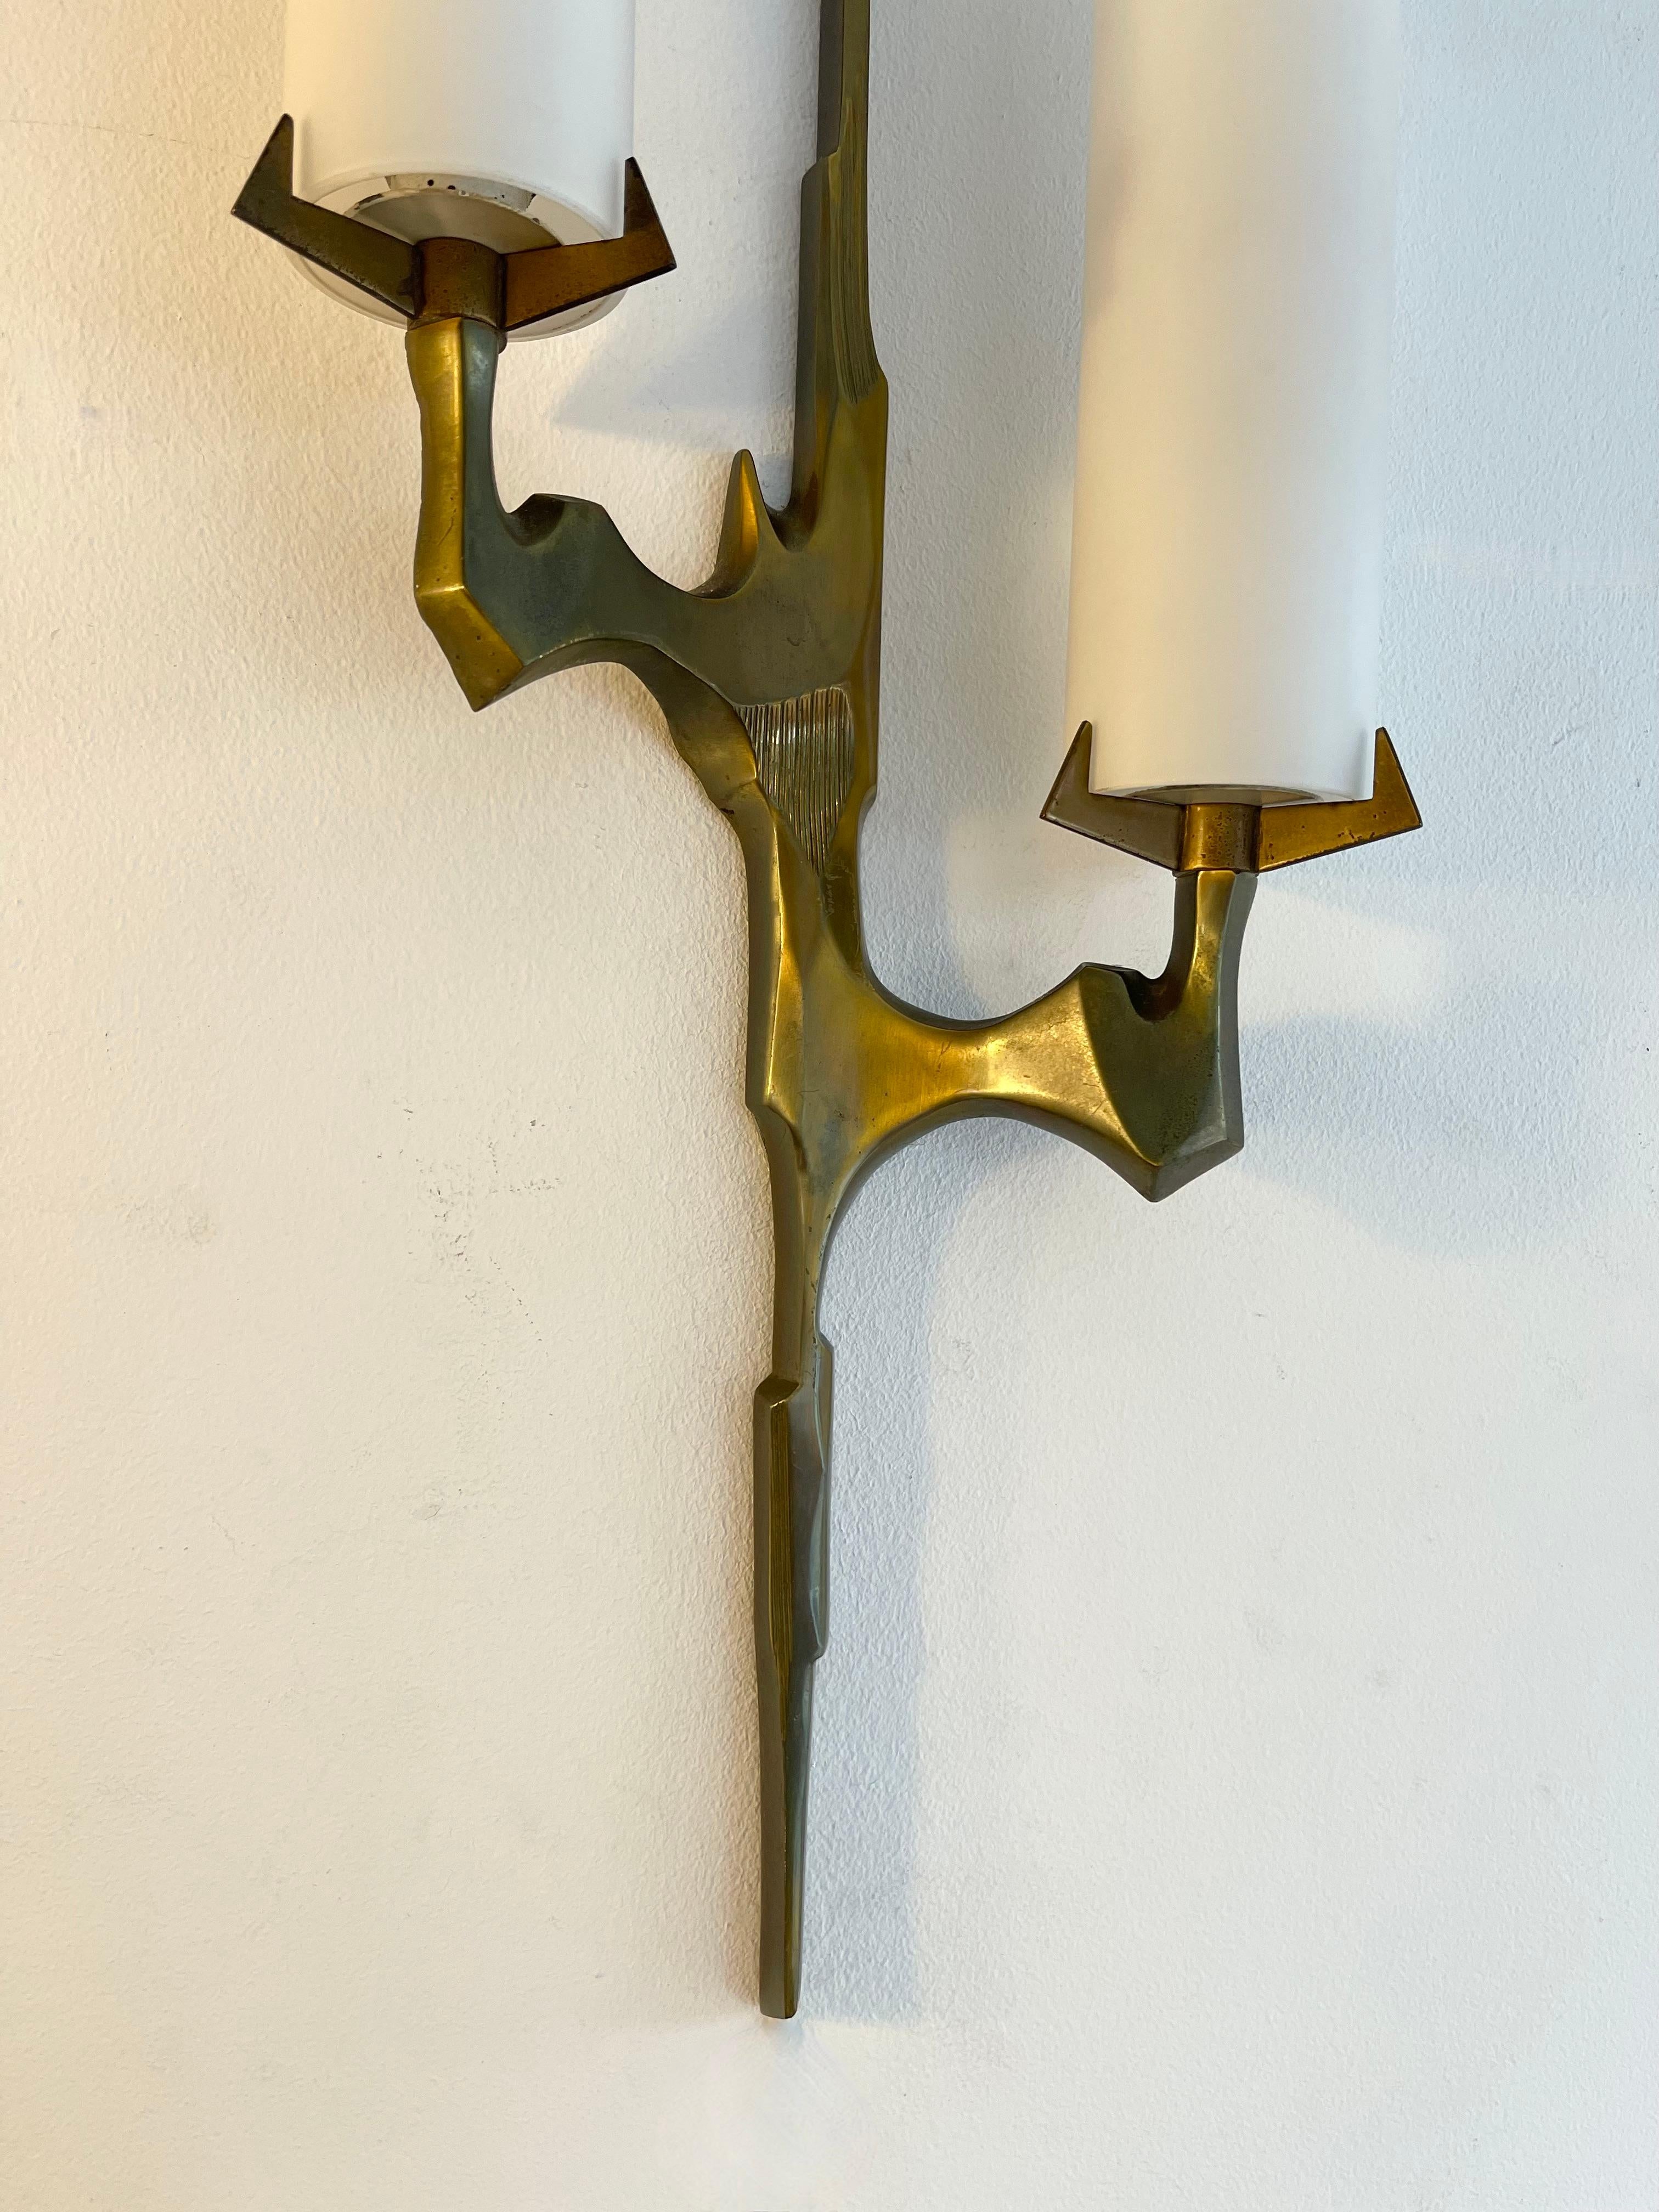 Mid-Century Modern pair of sconces or wall lights lamps by Maison Arlus. In cast gilt bronze and opaline glass. Rare model, nice patina. Original documentation on request. It’s a famous manufacture like Stilnovo, Arteluce, Arredoluce, Maison Jansen,